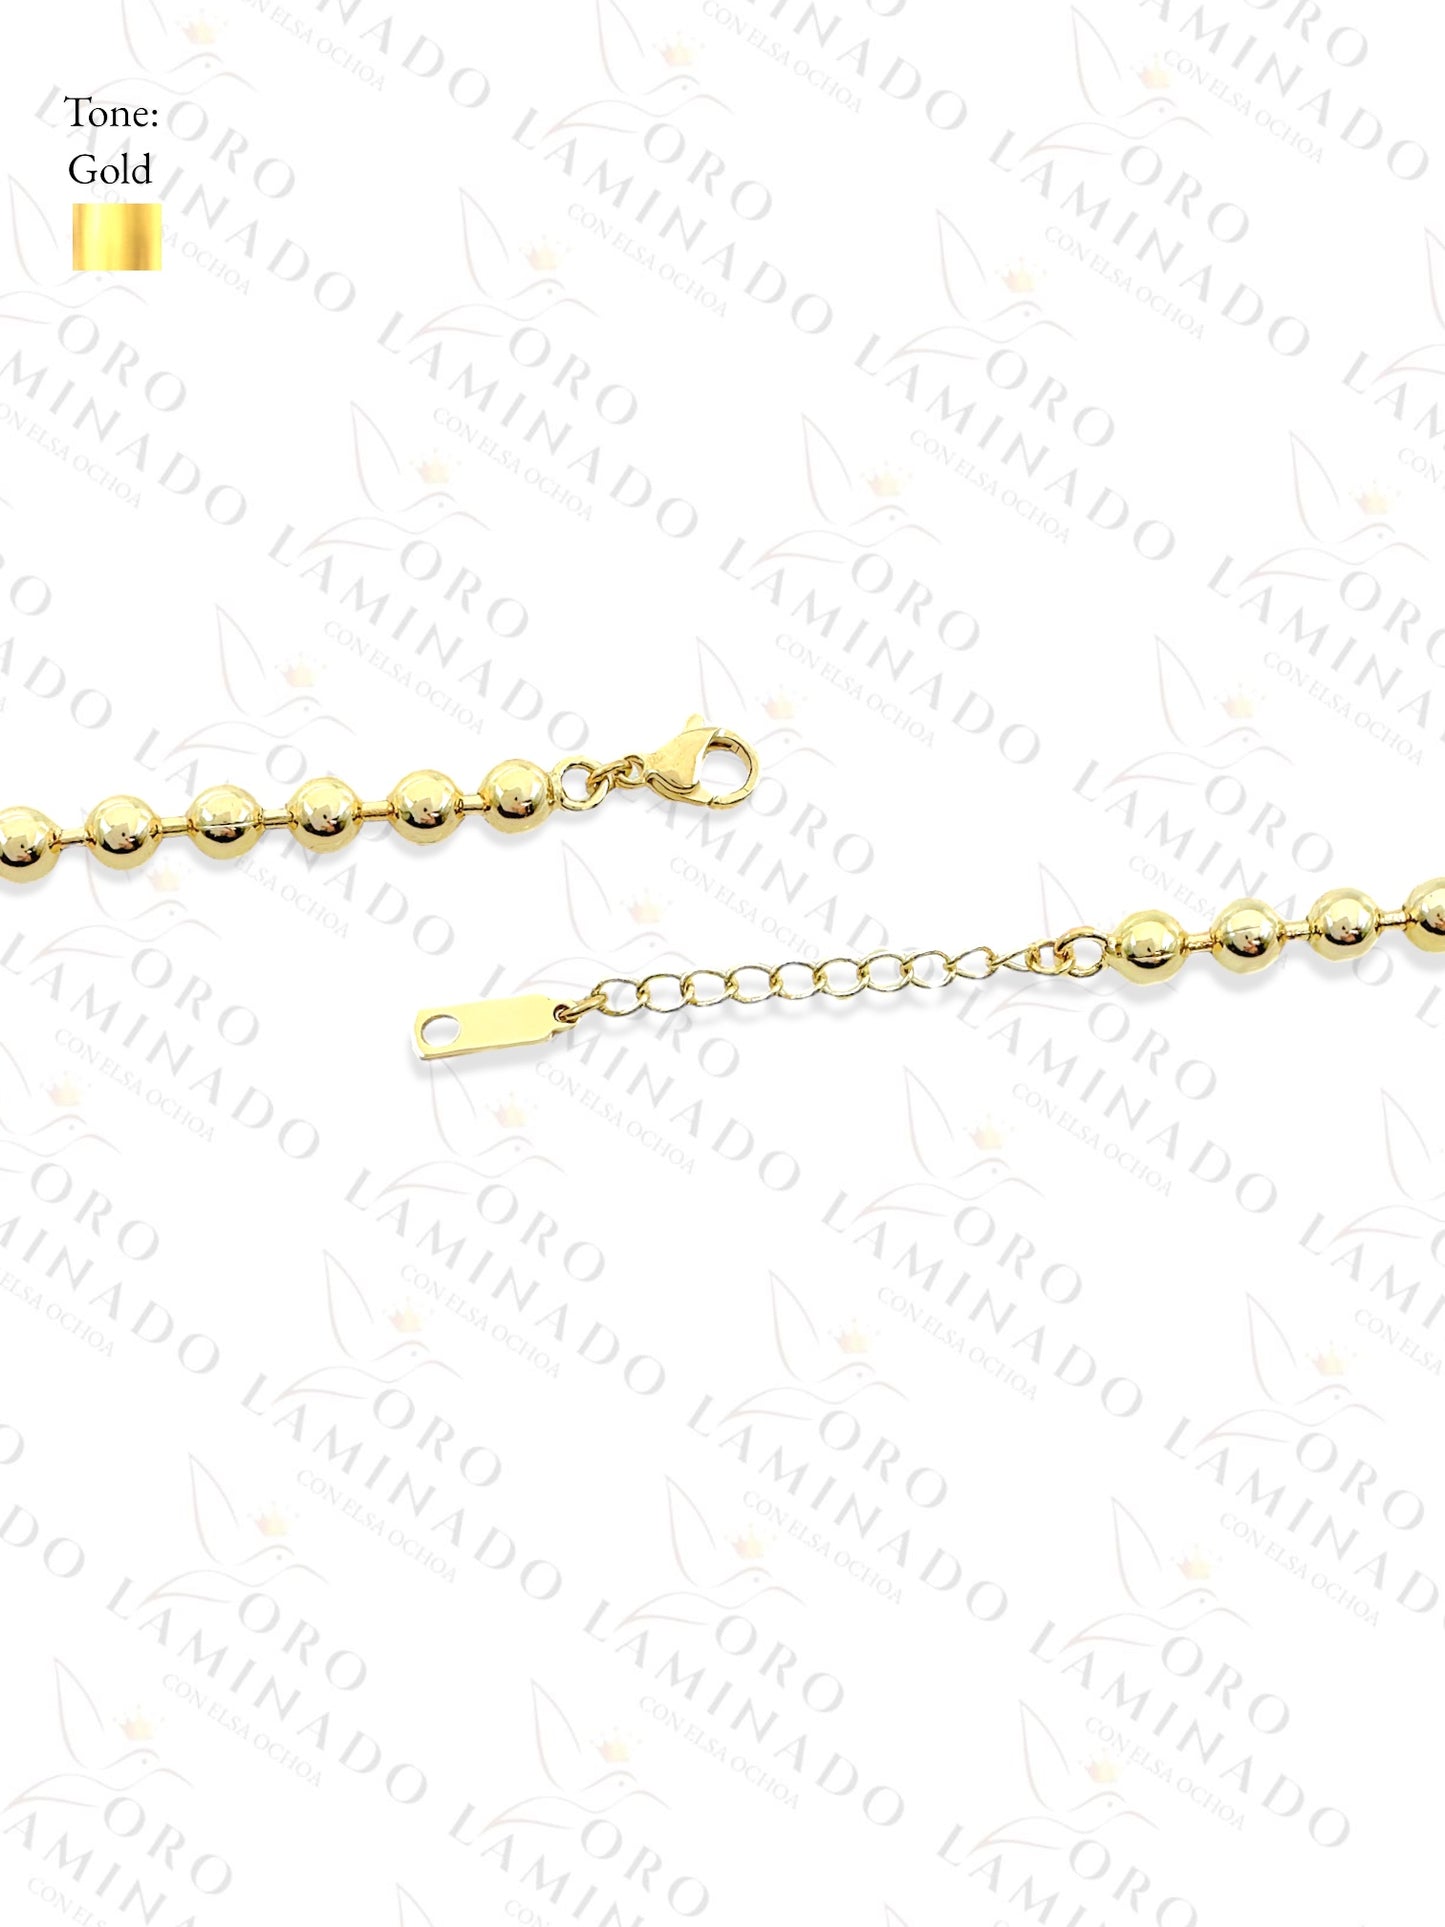 High Quality Ball Bead Chains Pack of 6 Size 18" 5mm C34